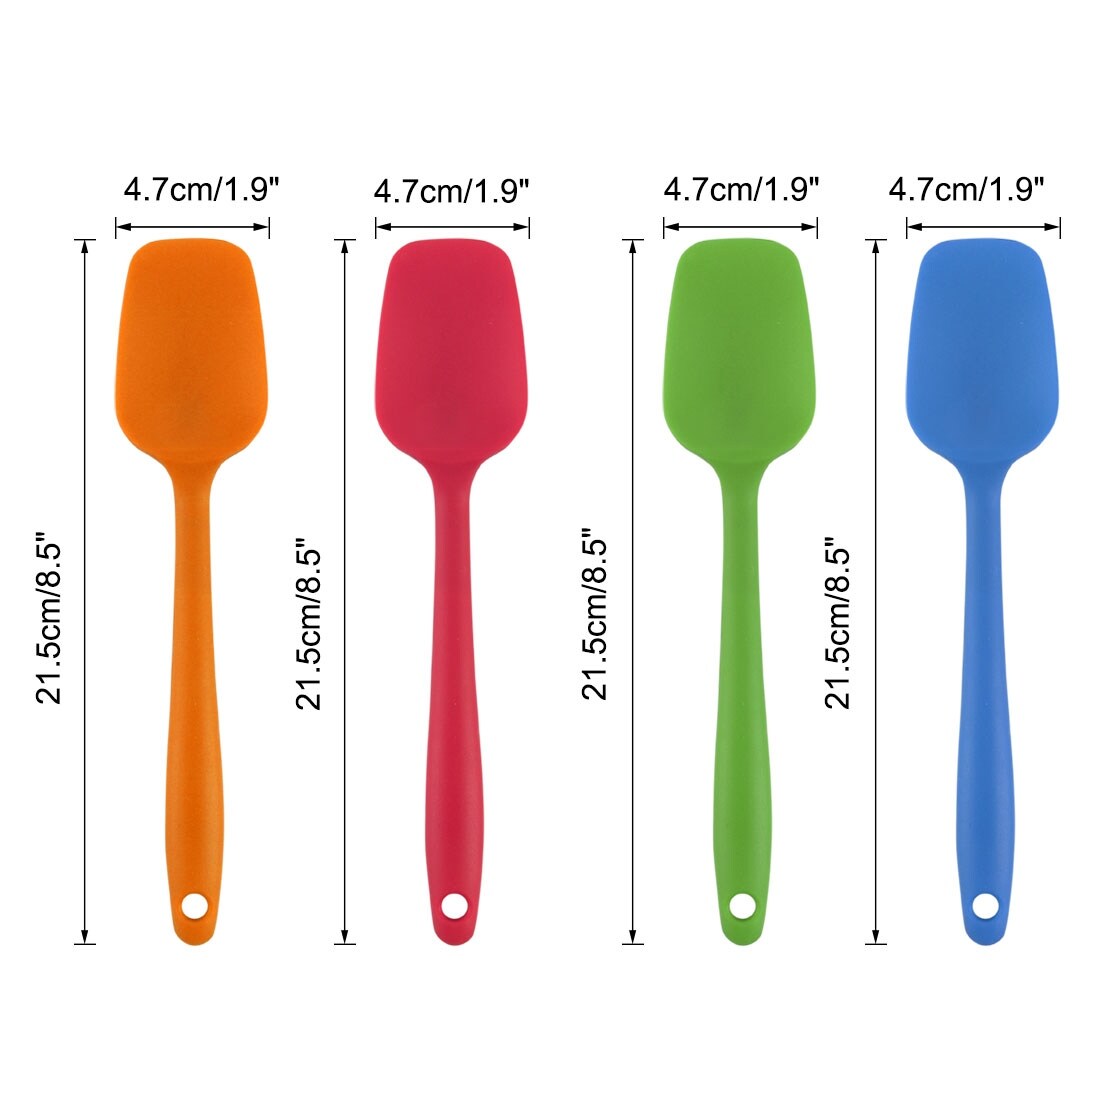 https://ak1.ostkcdn.com/images/products/is/images/direct/7bf5612a2b879f4c07b9e318d2c2489400d36c51/4pcs-Silicone-Spatula-Heat-Resistant-Kitchen-Flipping-Turner-Non-Stick-Kicthen-Spatula-for-Cooking-Baking-Bulk.jpg